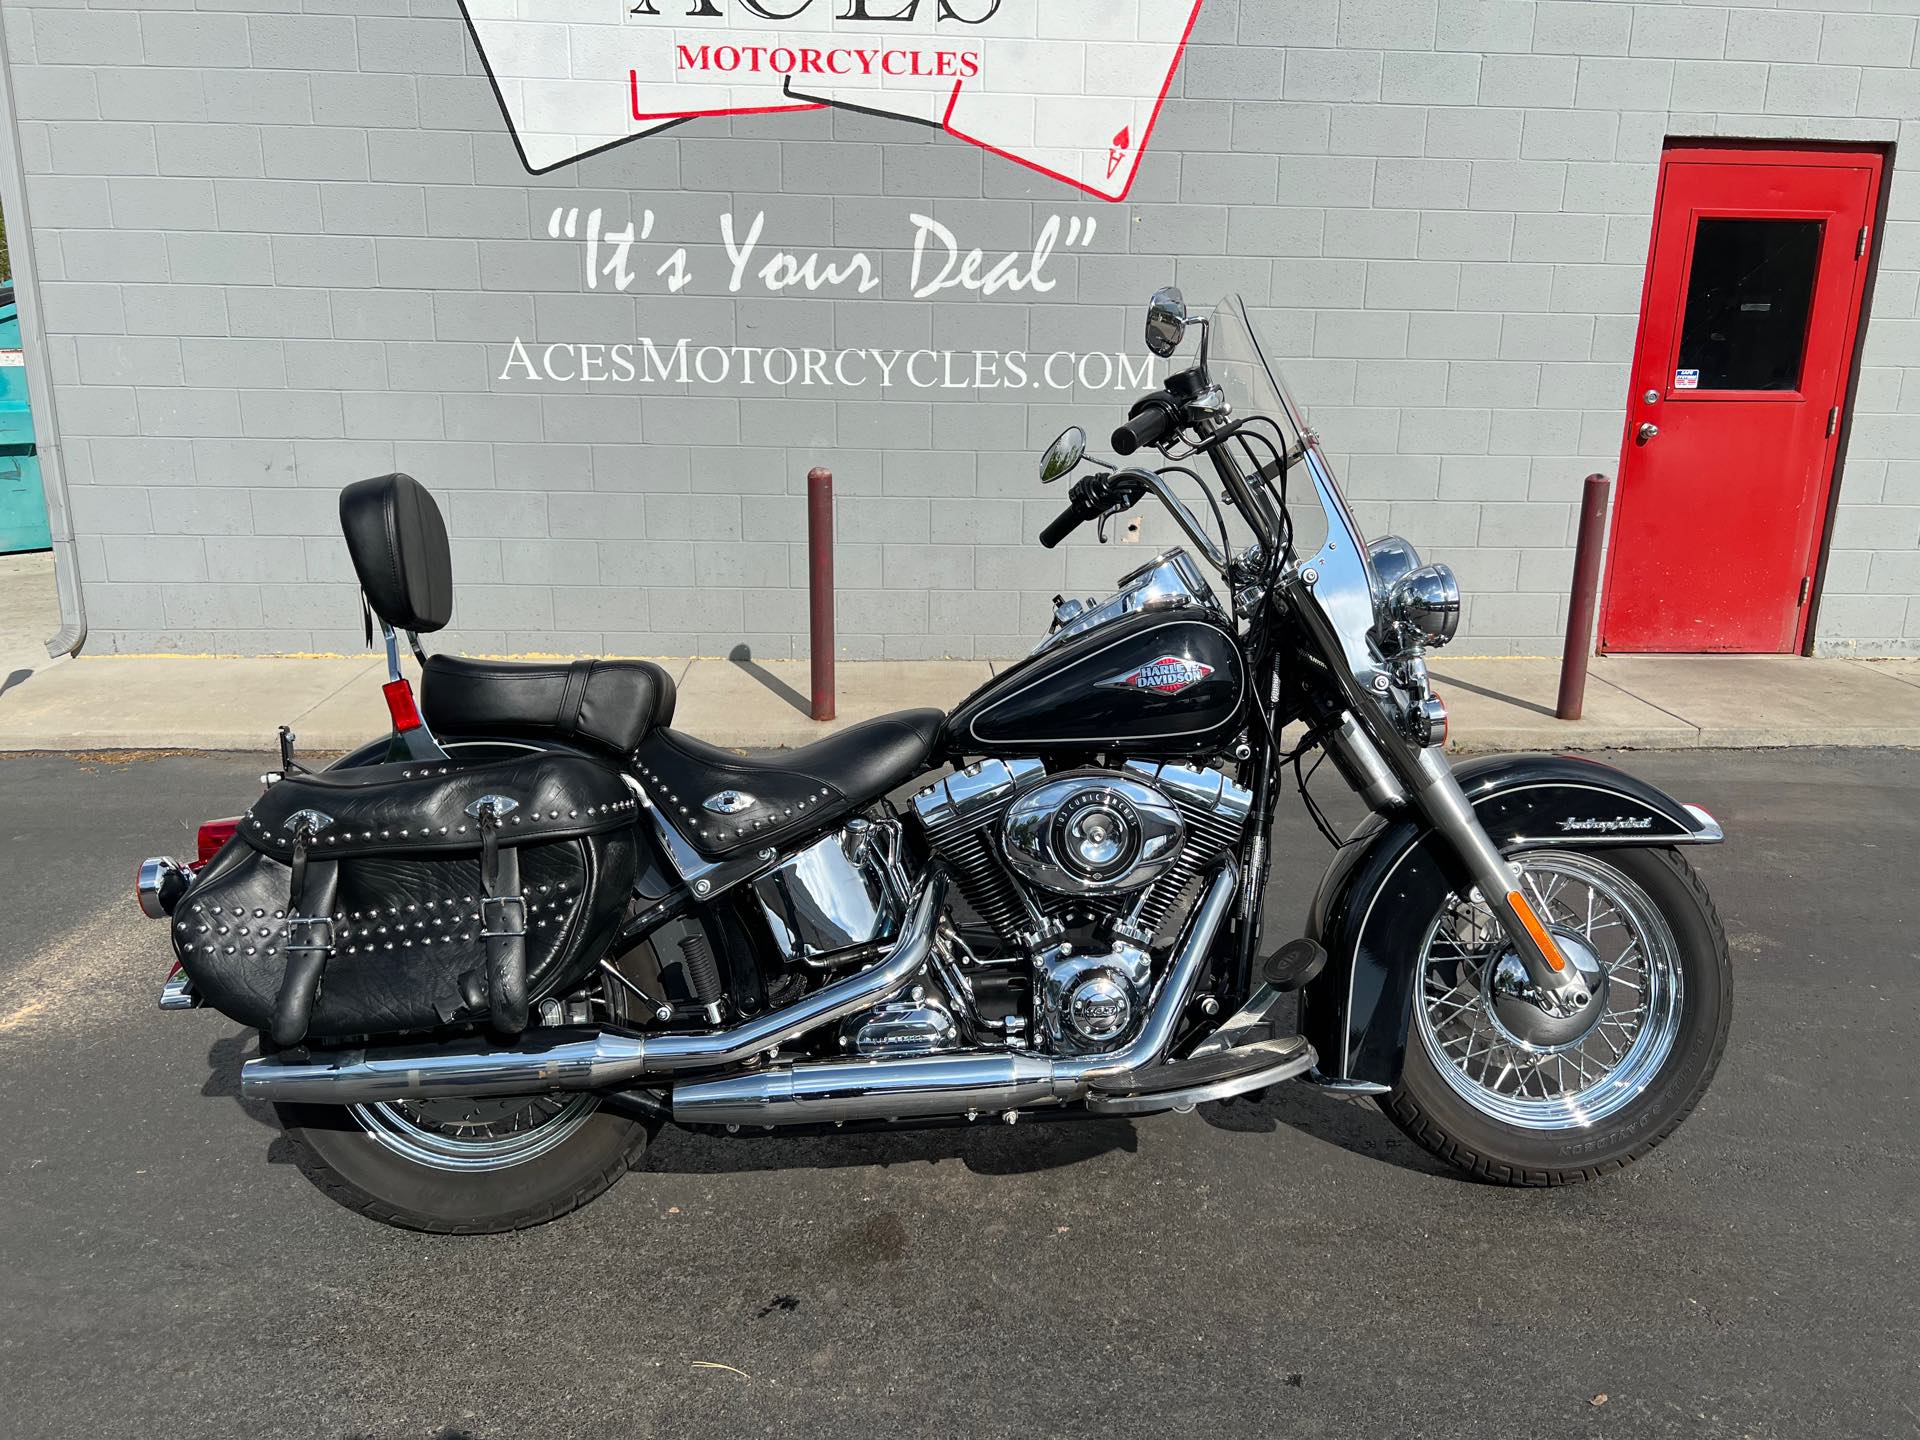 2015 Harley-Davidson Softail Heritage Softail Classic at Aces Motorcycles - Fort Collins